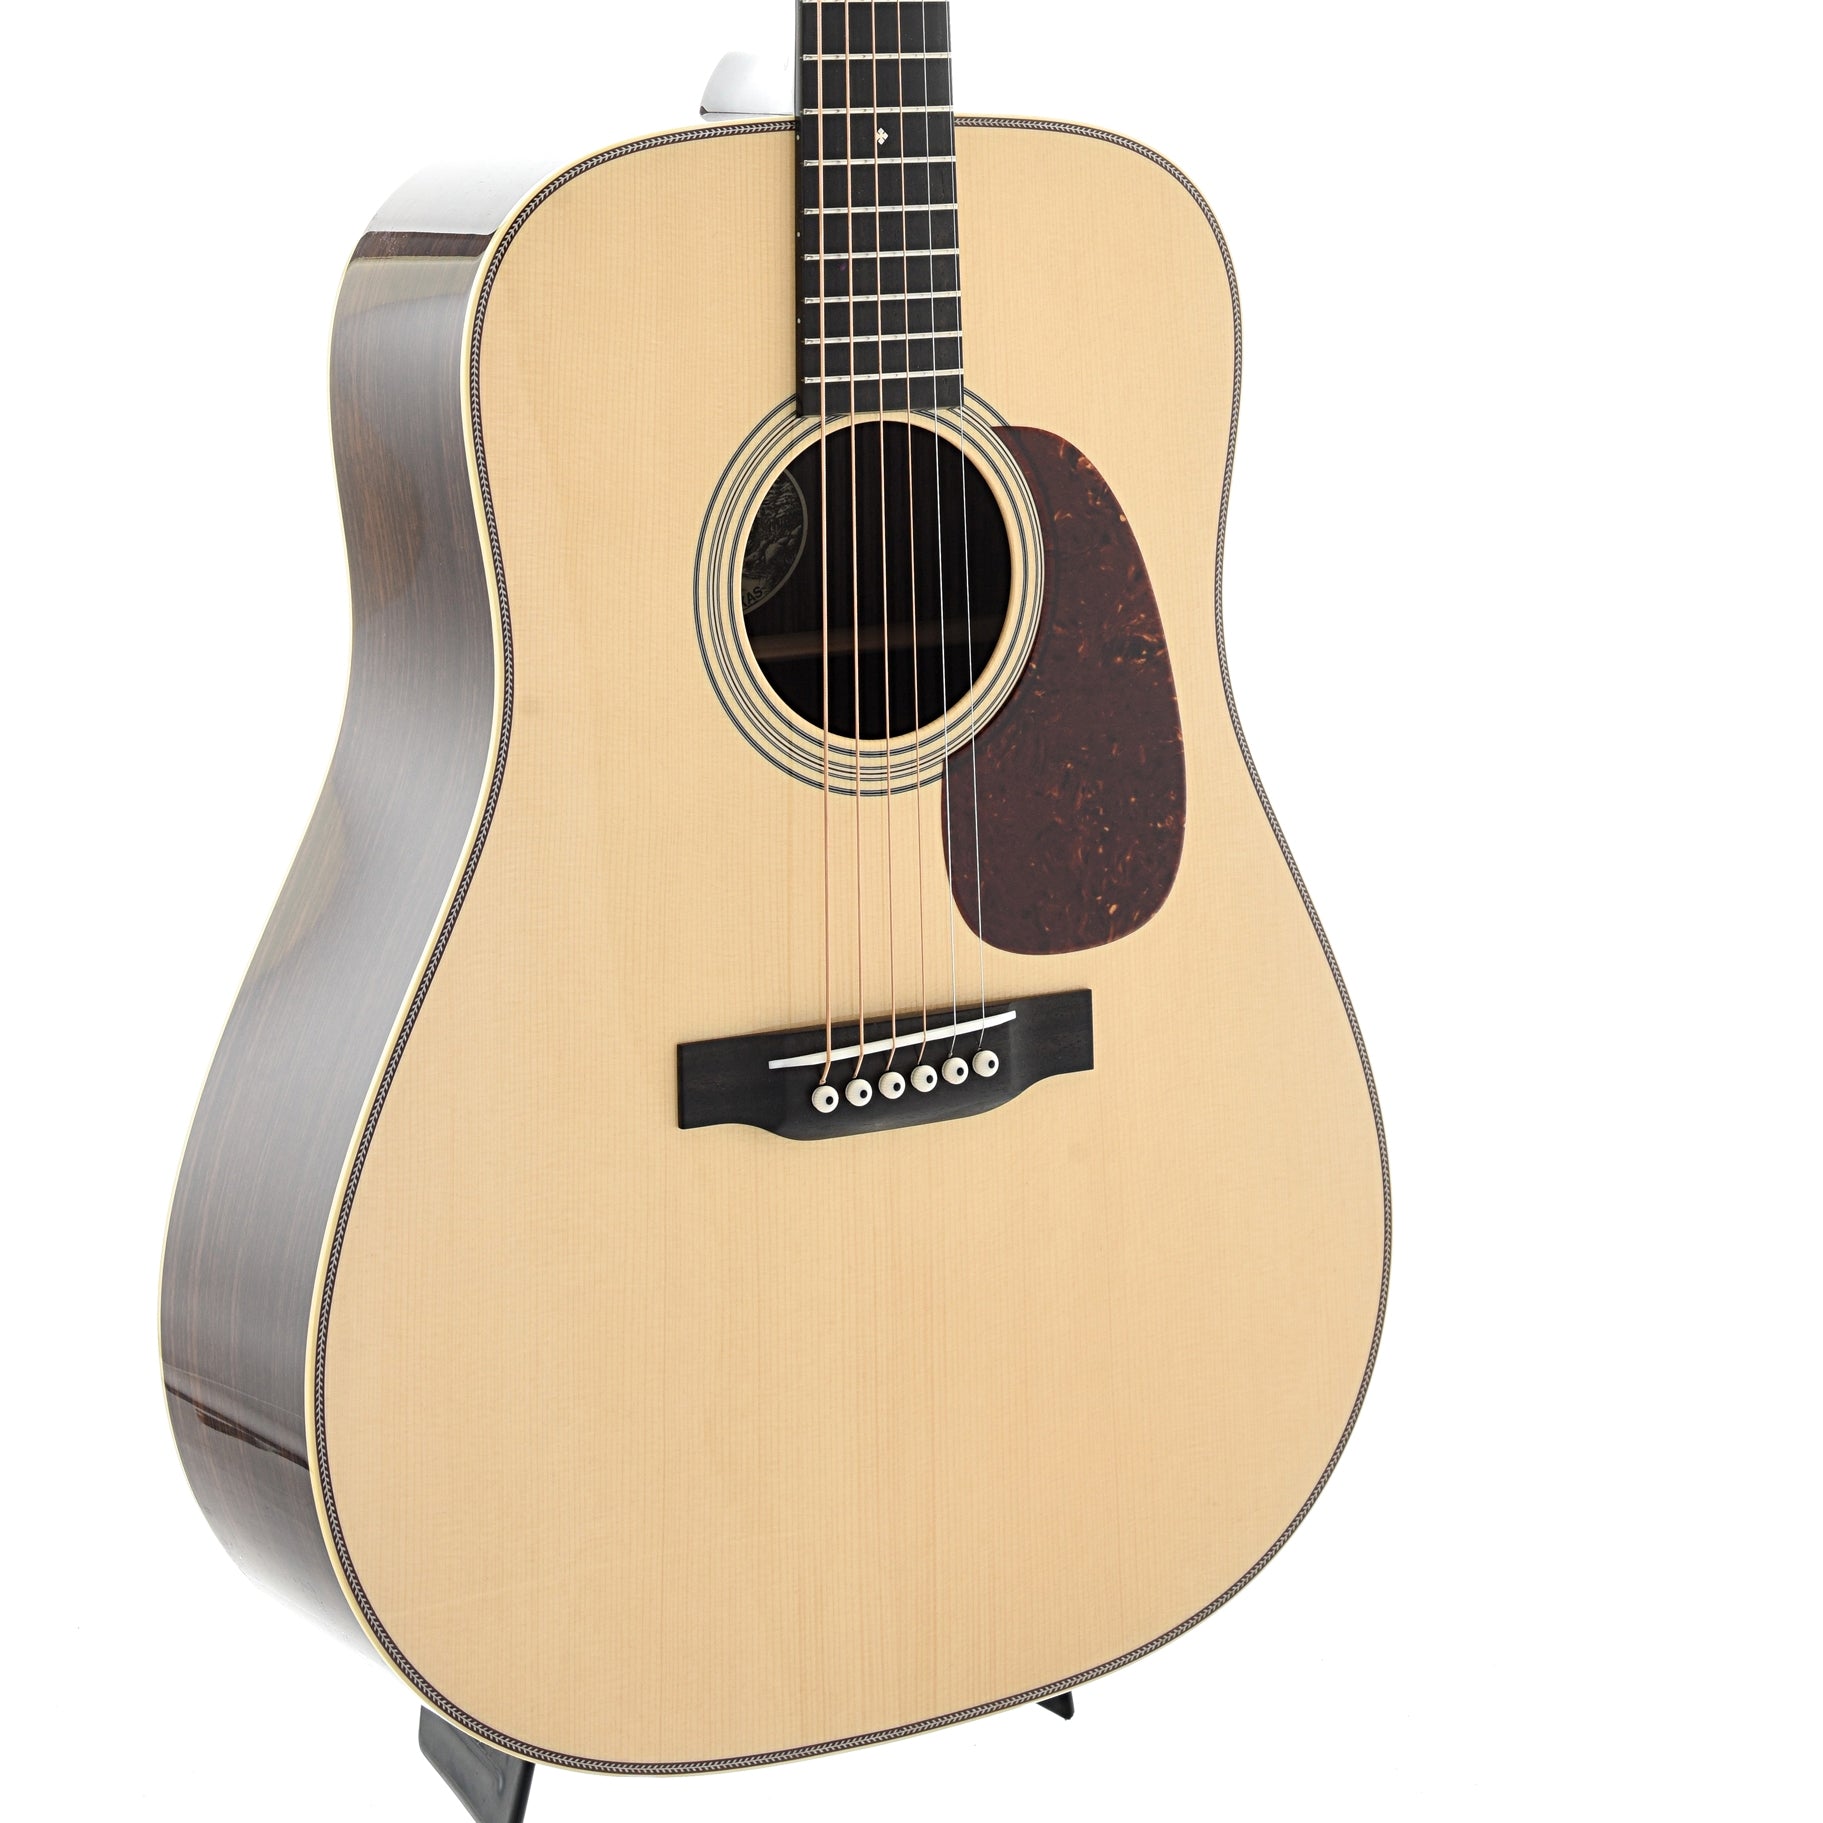 Image 2 of Collings D2HT Traditional Series Guitar& Case, Adirondack Top - SKU# COLD2HT-I-A : Product Type Flat-top Guitars : Elderly Instruments